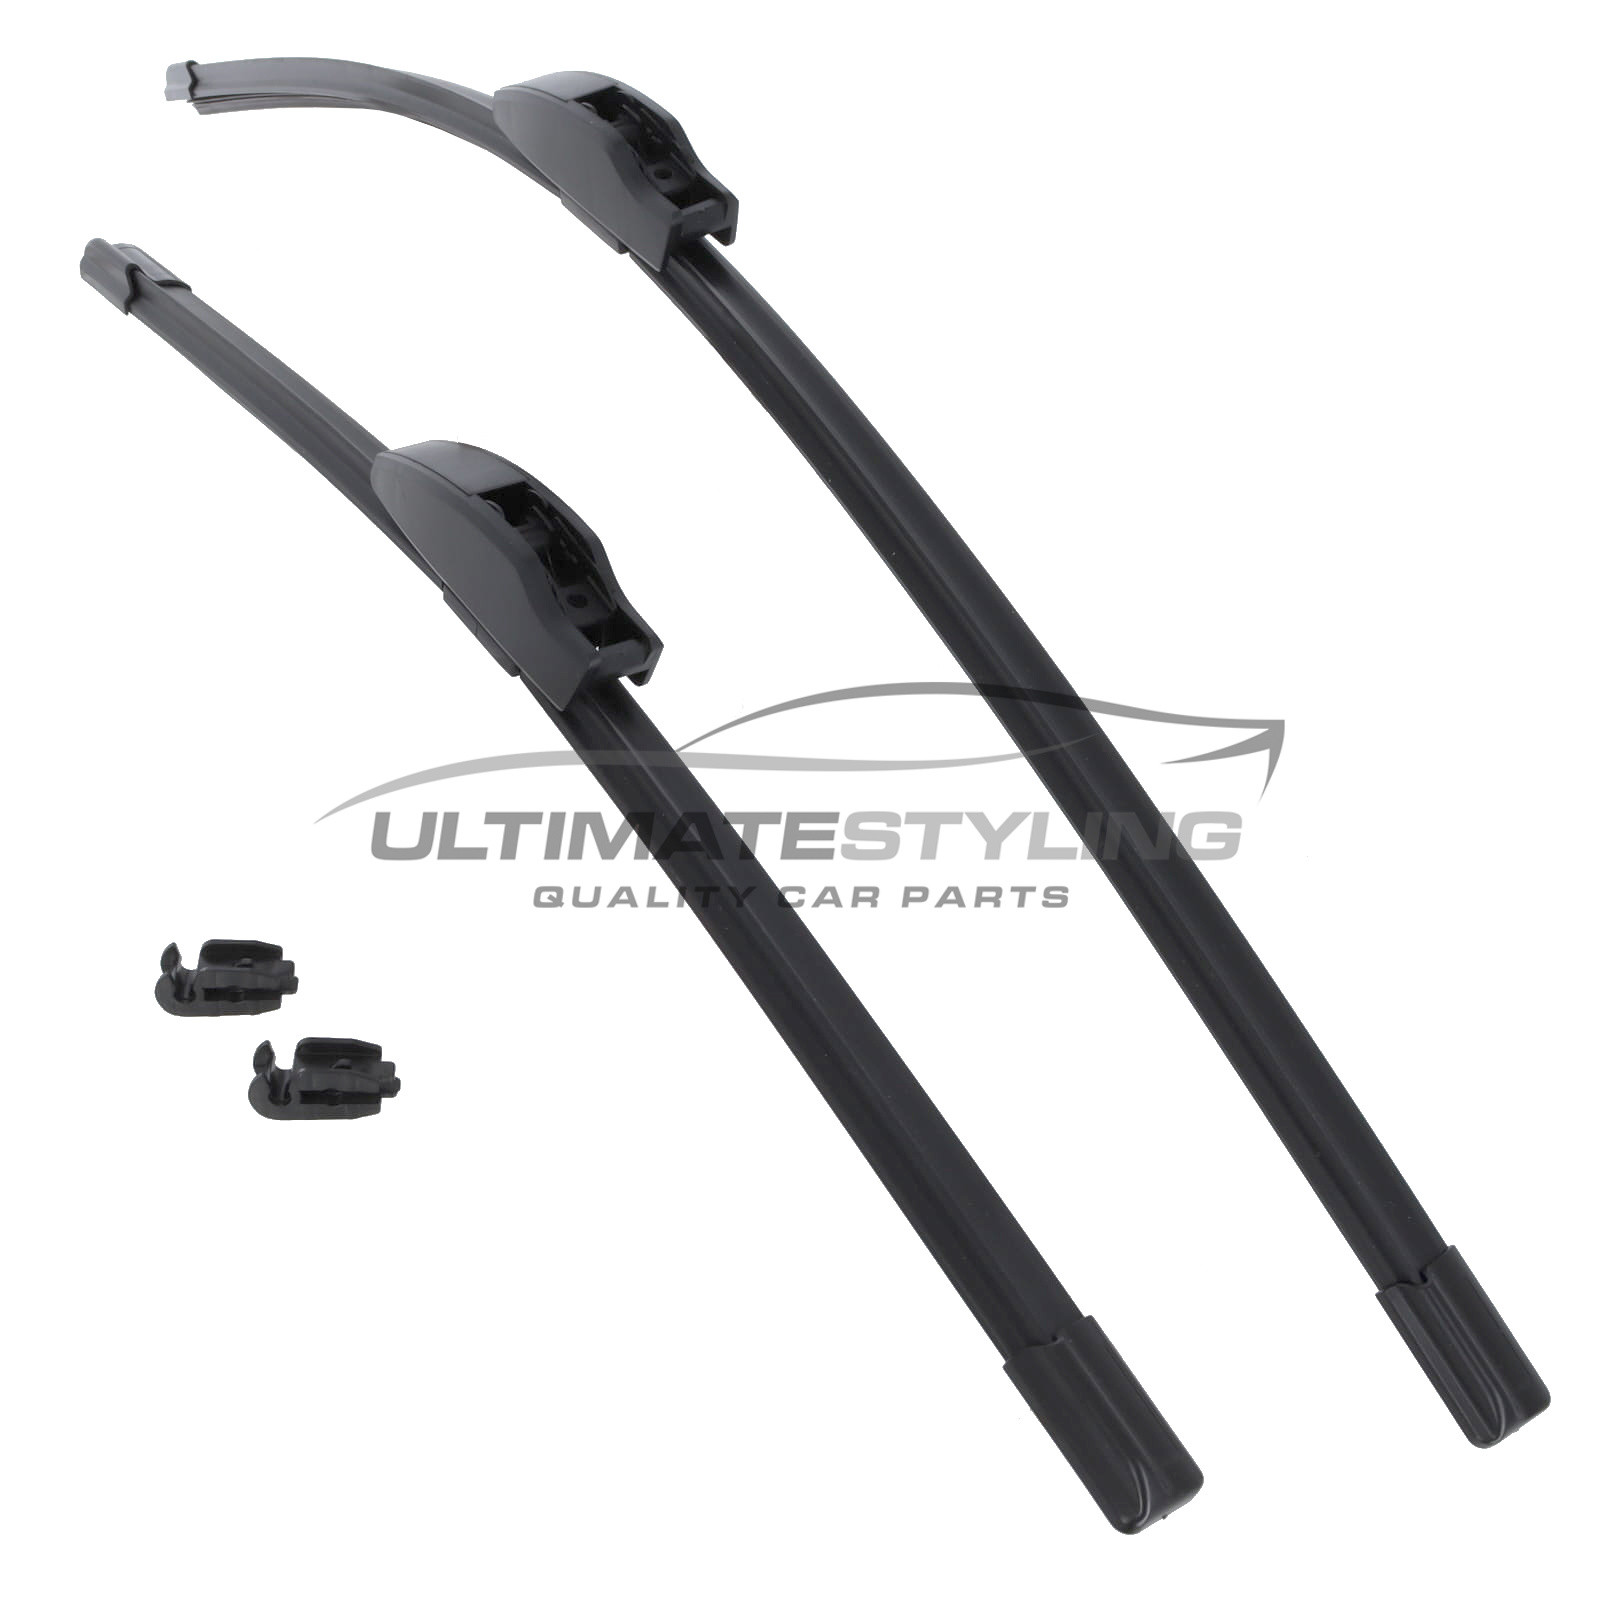 Drivers Side & Passenger Side (Front) Wiper Blades for Subaru Outback